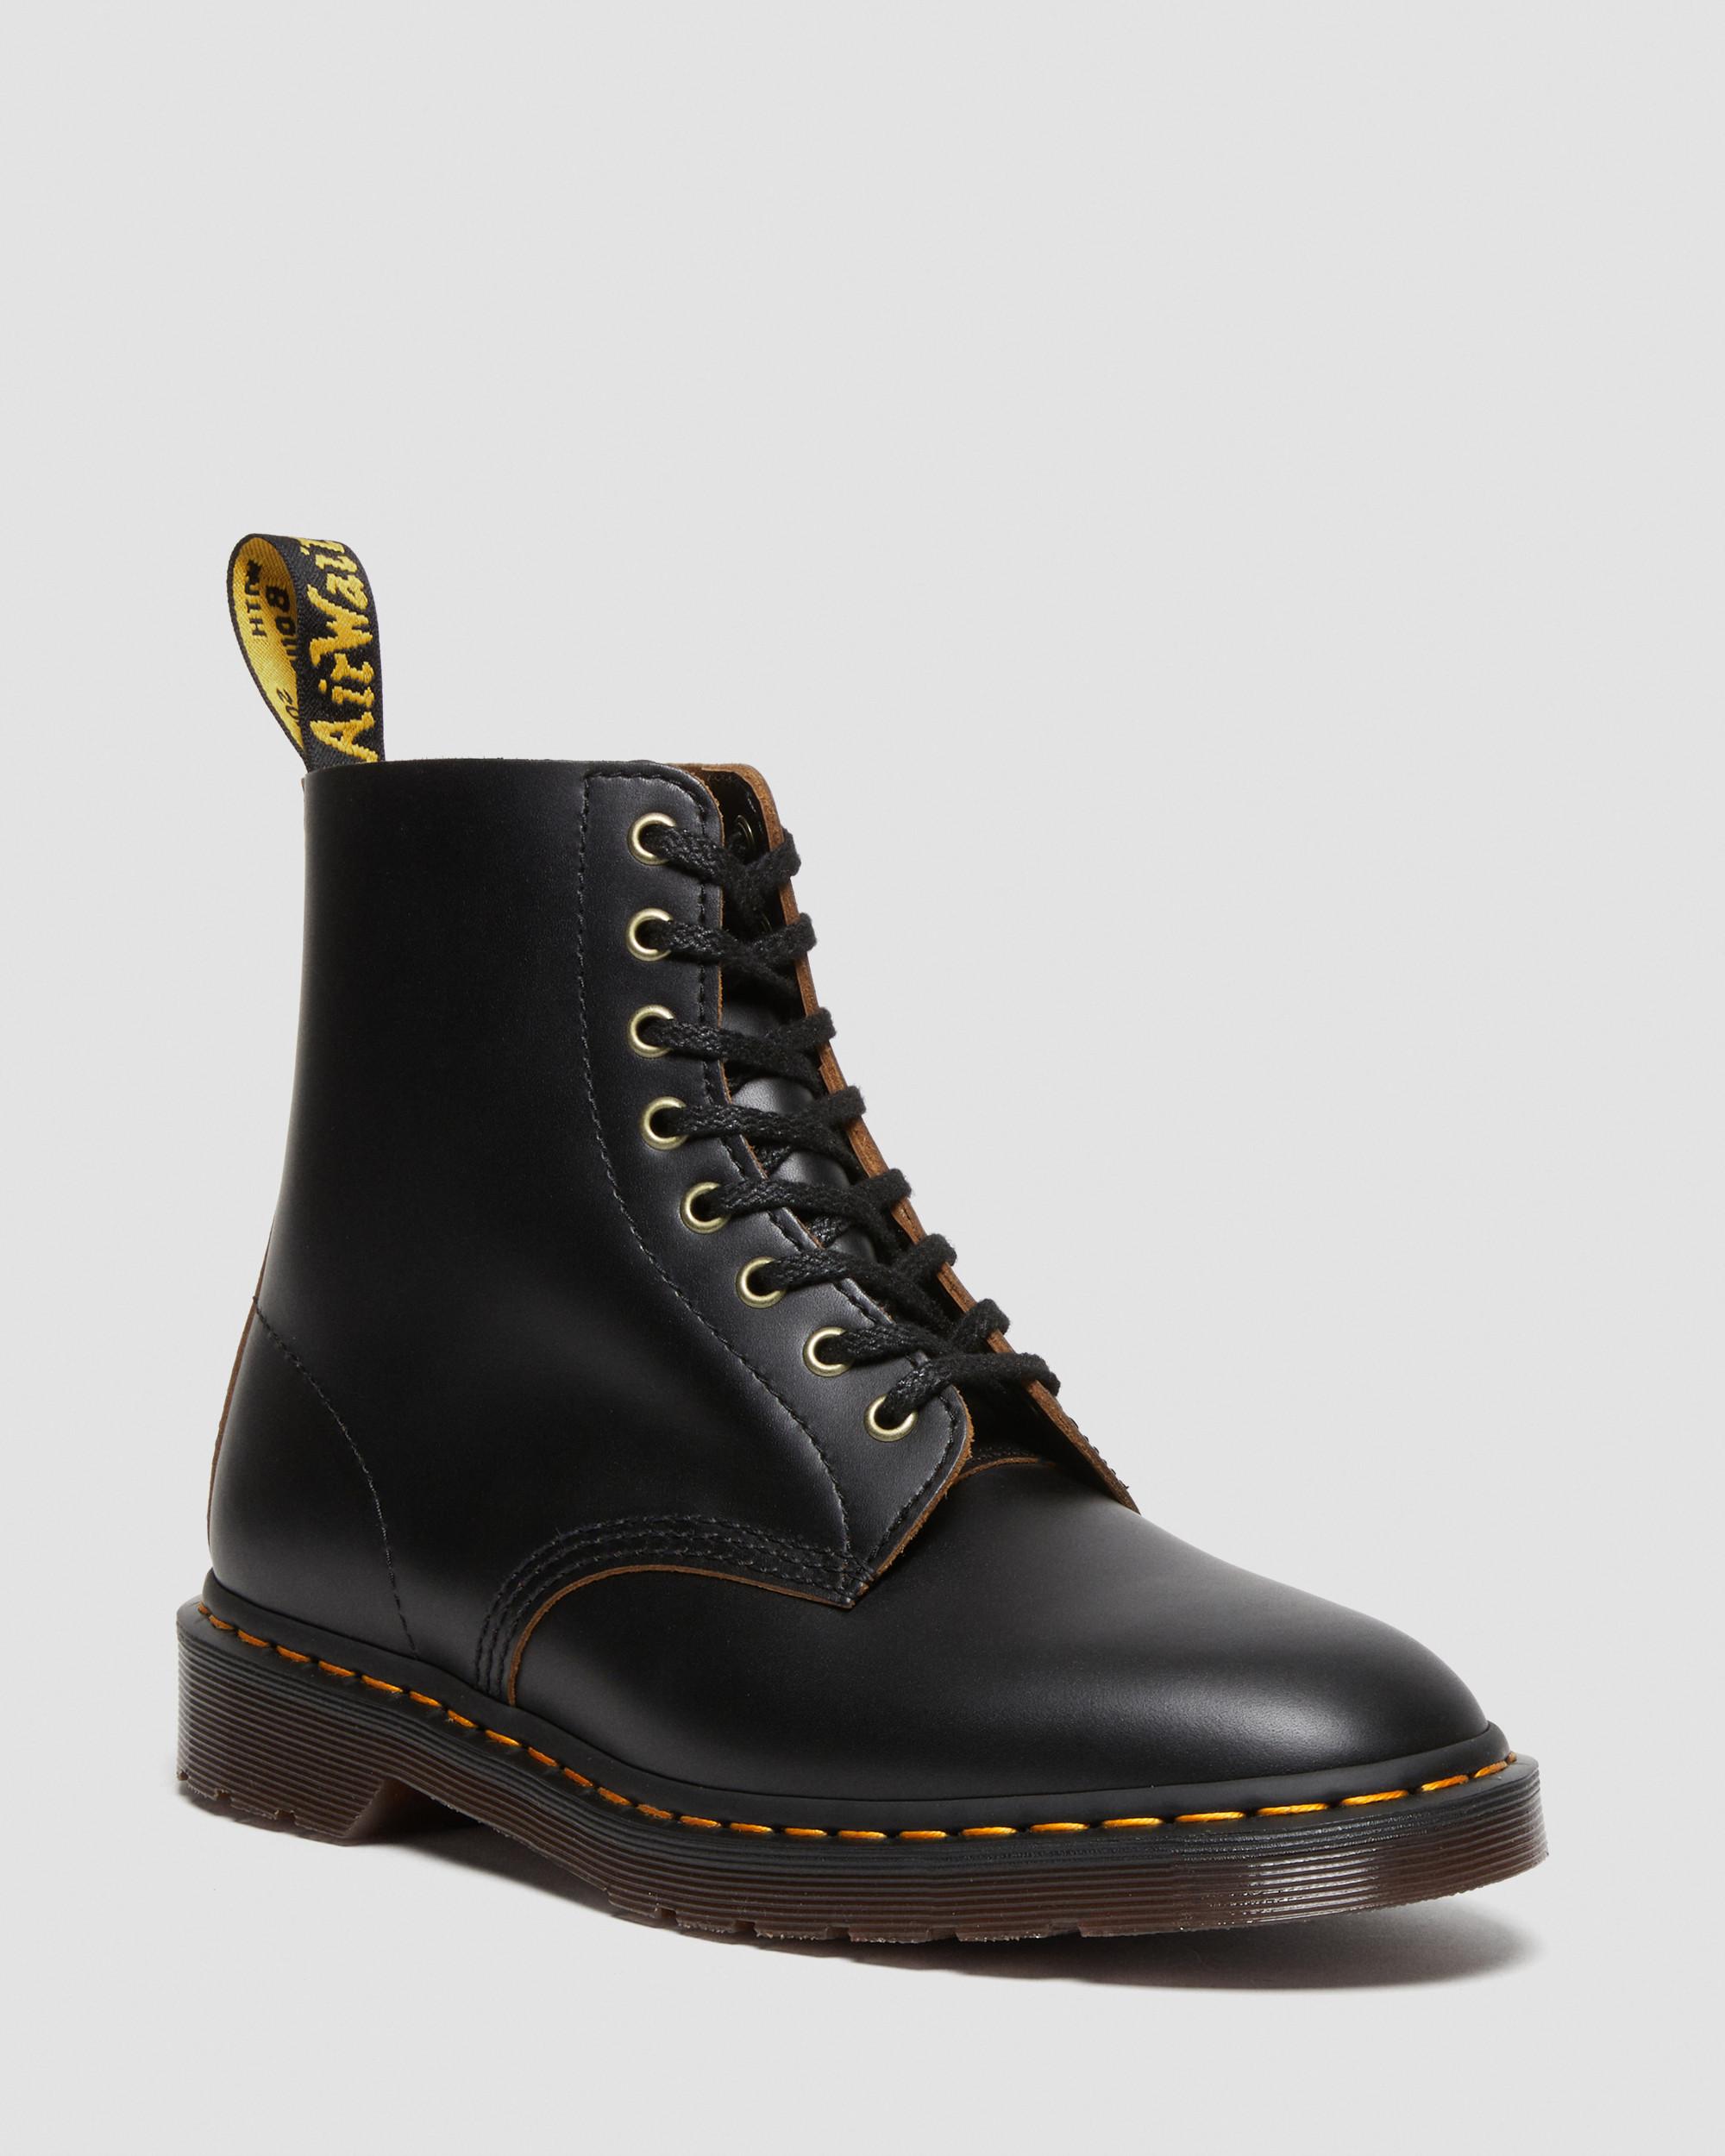 Smiths Vintage Smooth Leather Boots in Black